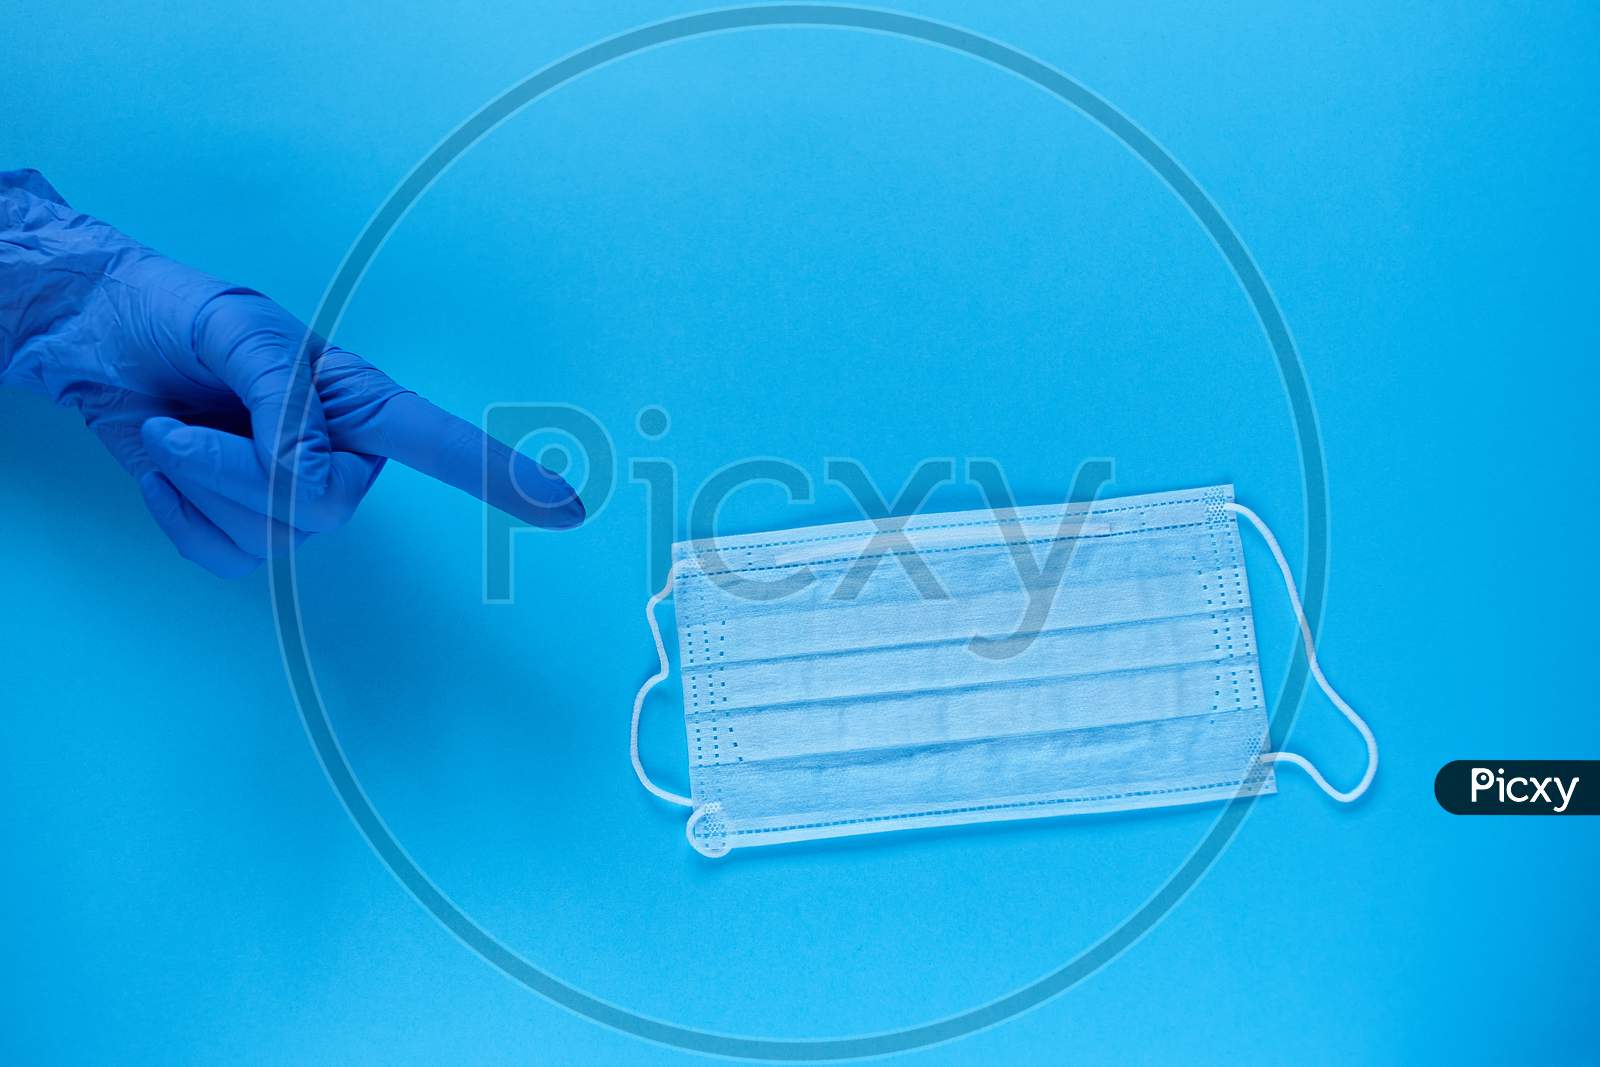 A Hand In A Protective Medical Glove Points A Finger At A Protective Medical Mask. Typical Surgical Mask For Covering The Mouth And Nose. Protect From Coronavirus And Bacteria Concept On Blue Background